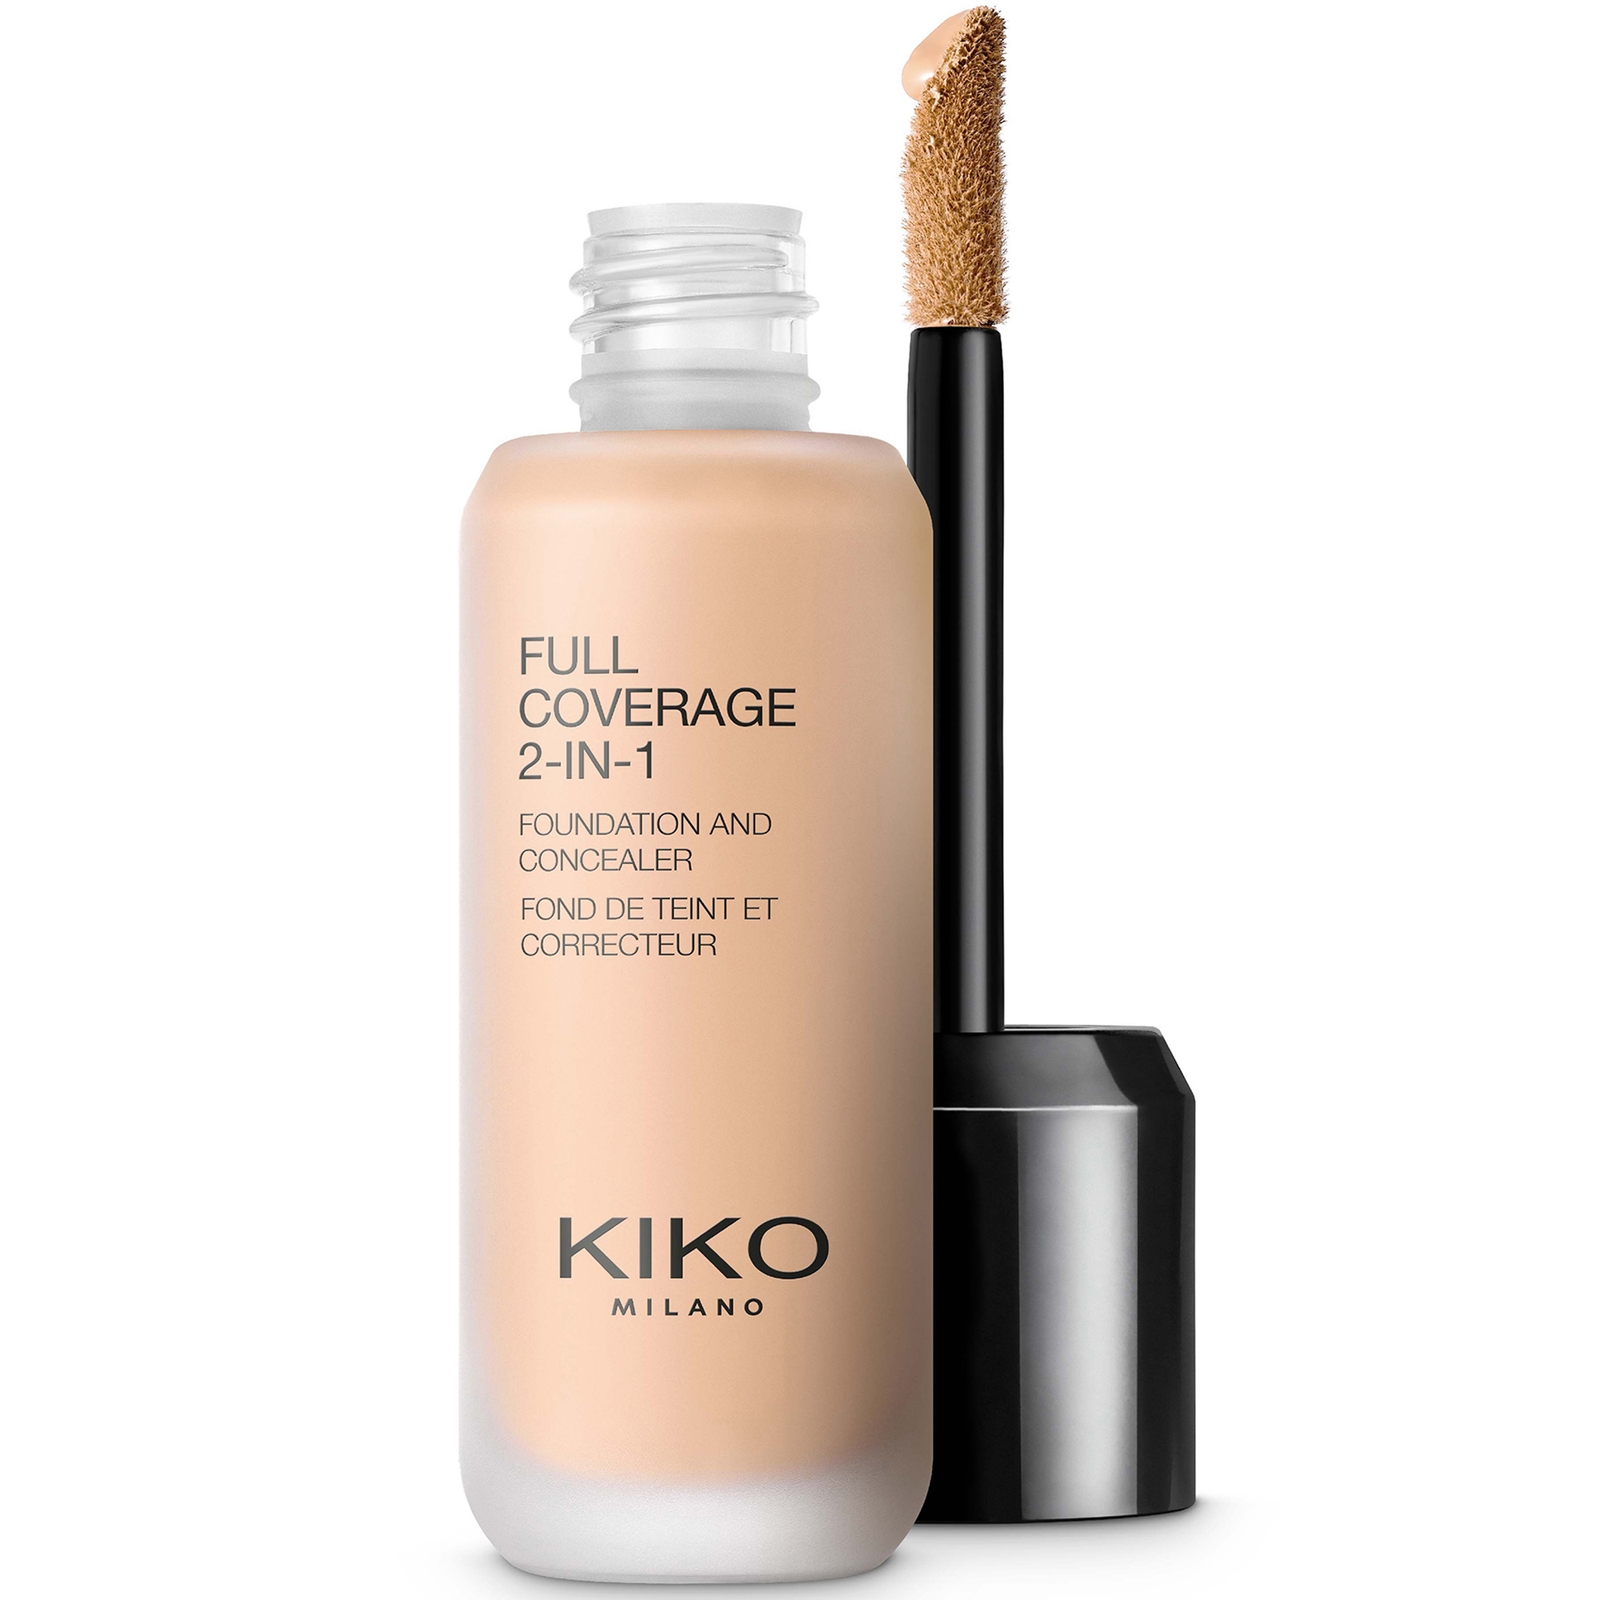 Image of KIKO Milano Full Coverage 2-in-1 Foundation and Concealer 25ml (Various Shades) - 15 Neutral